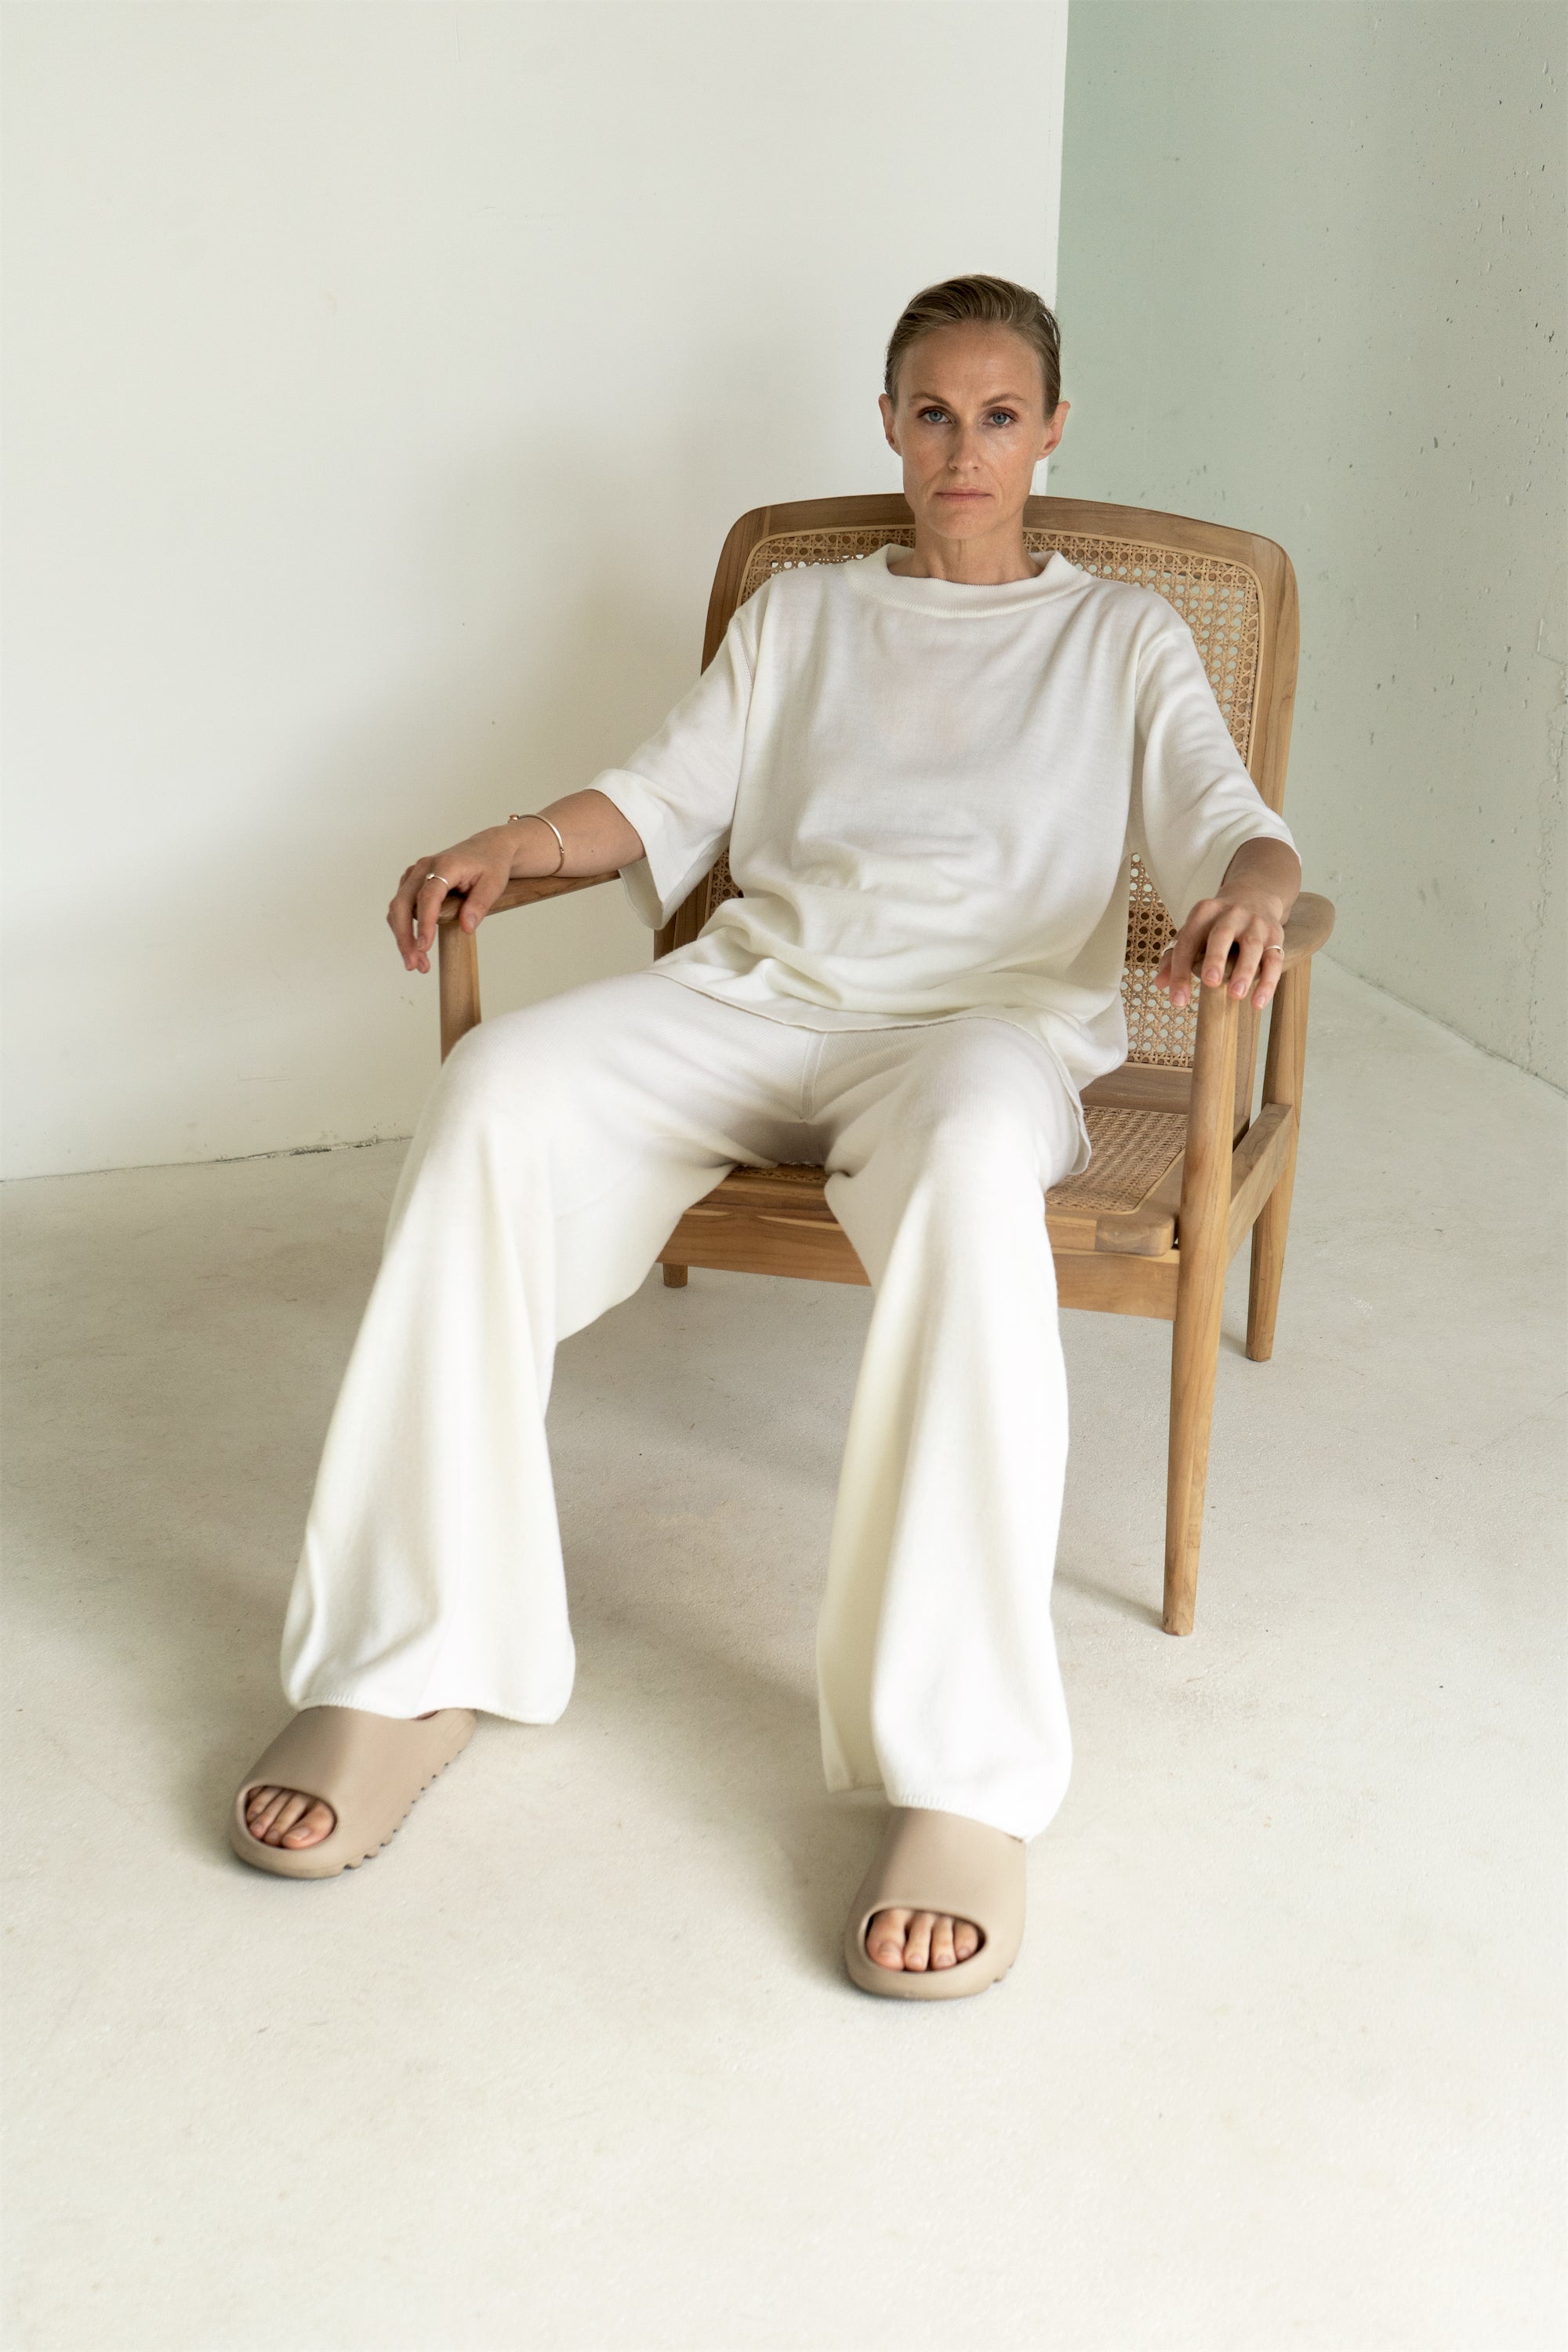 PEARL EXTRA FINE MERINO WOOL T-SHIRT AND TROUSERS SET for lovers and trees 